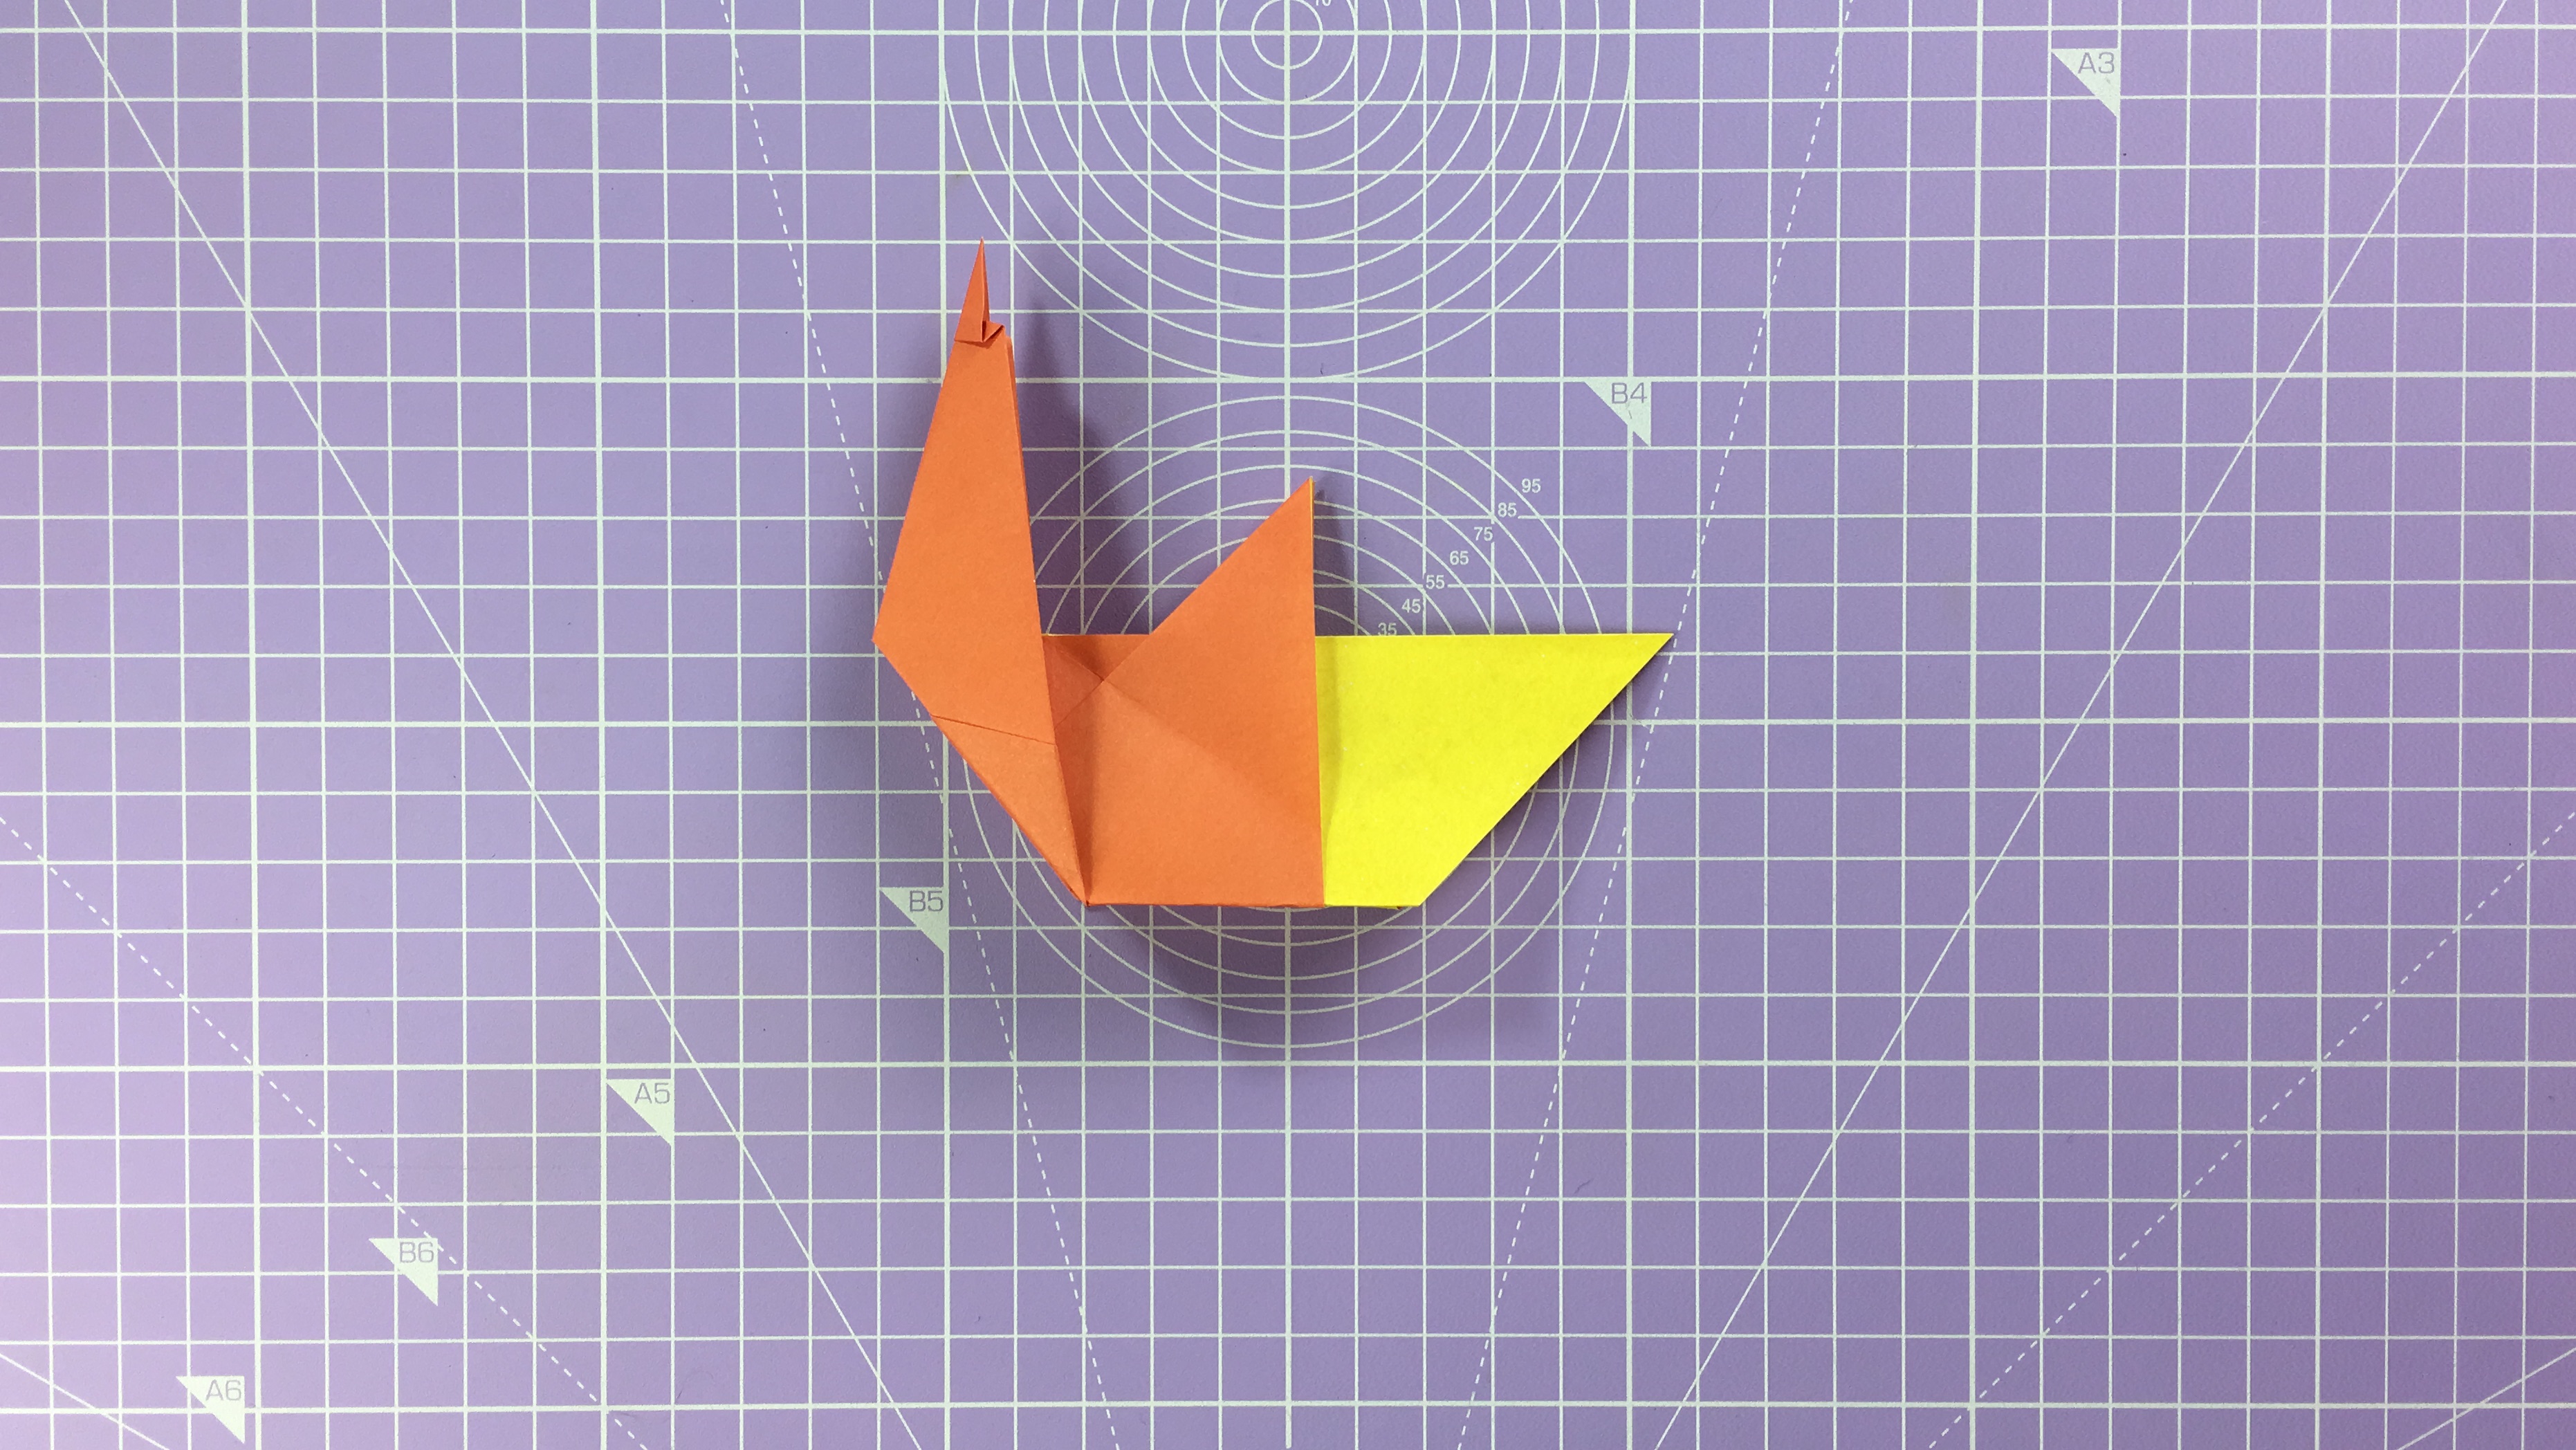 How to make an origami duck - step 13b